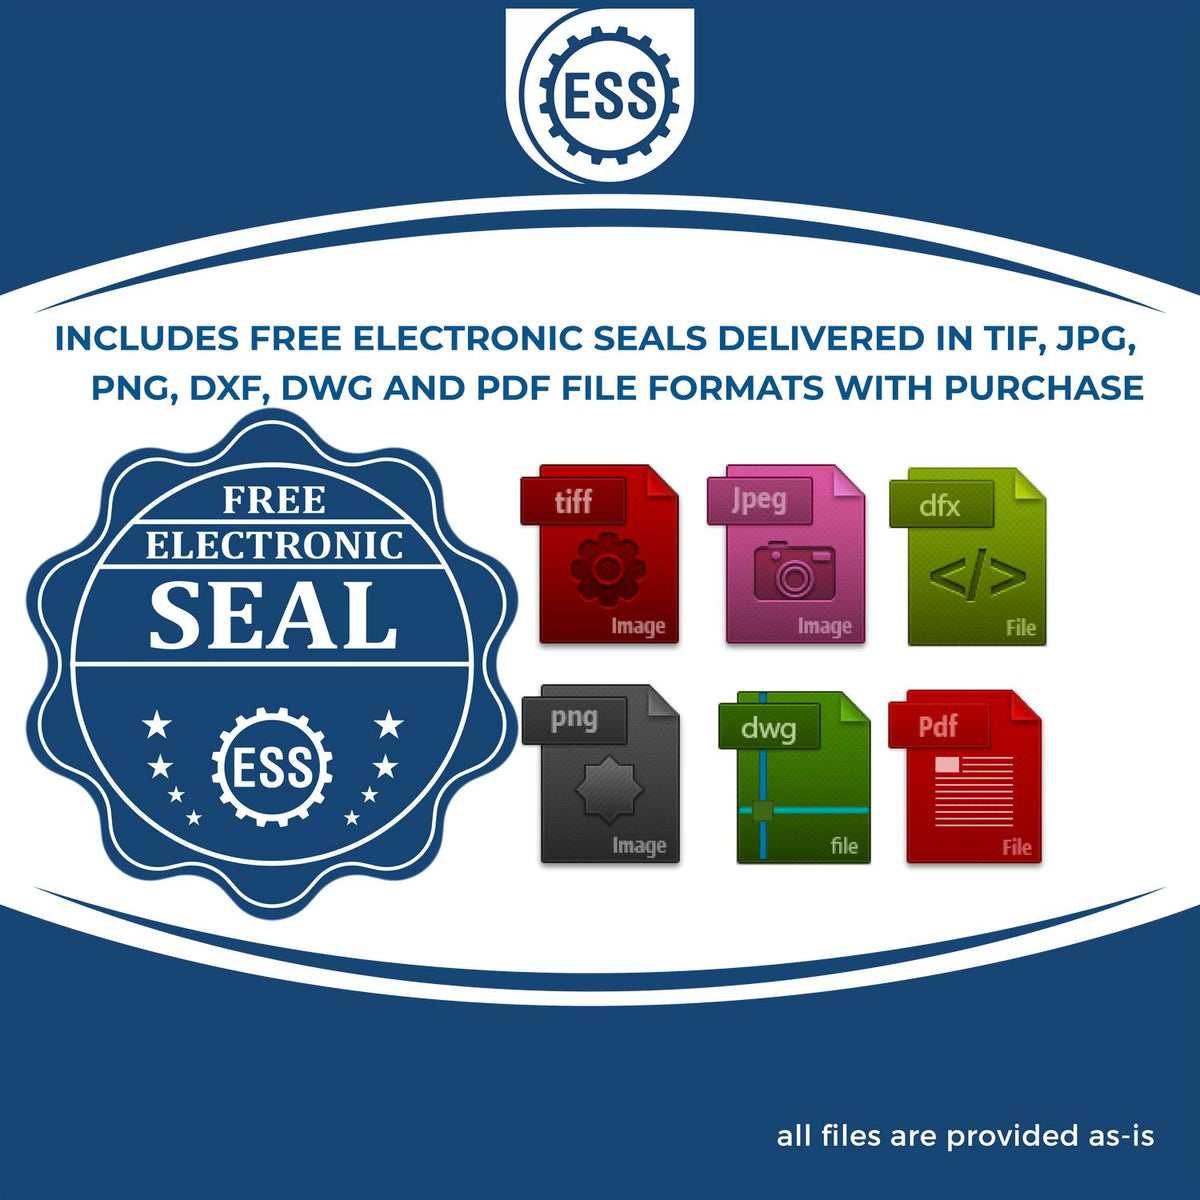 An infographic for the free electronic seal for the Heavy Duty Cast Iron Idaho Engineer Seal Embosser illustrating the different file type icons such as DXF, DWG, TIF, JPG and PNG.